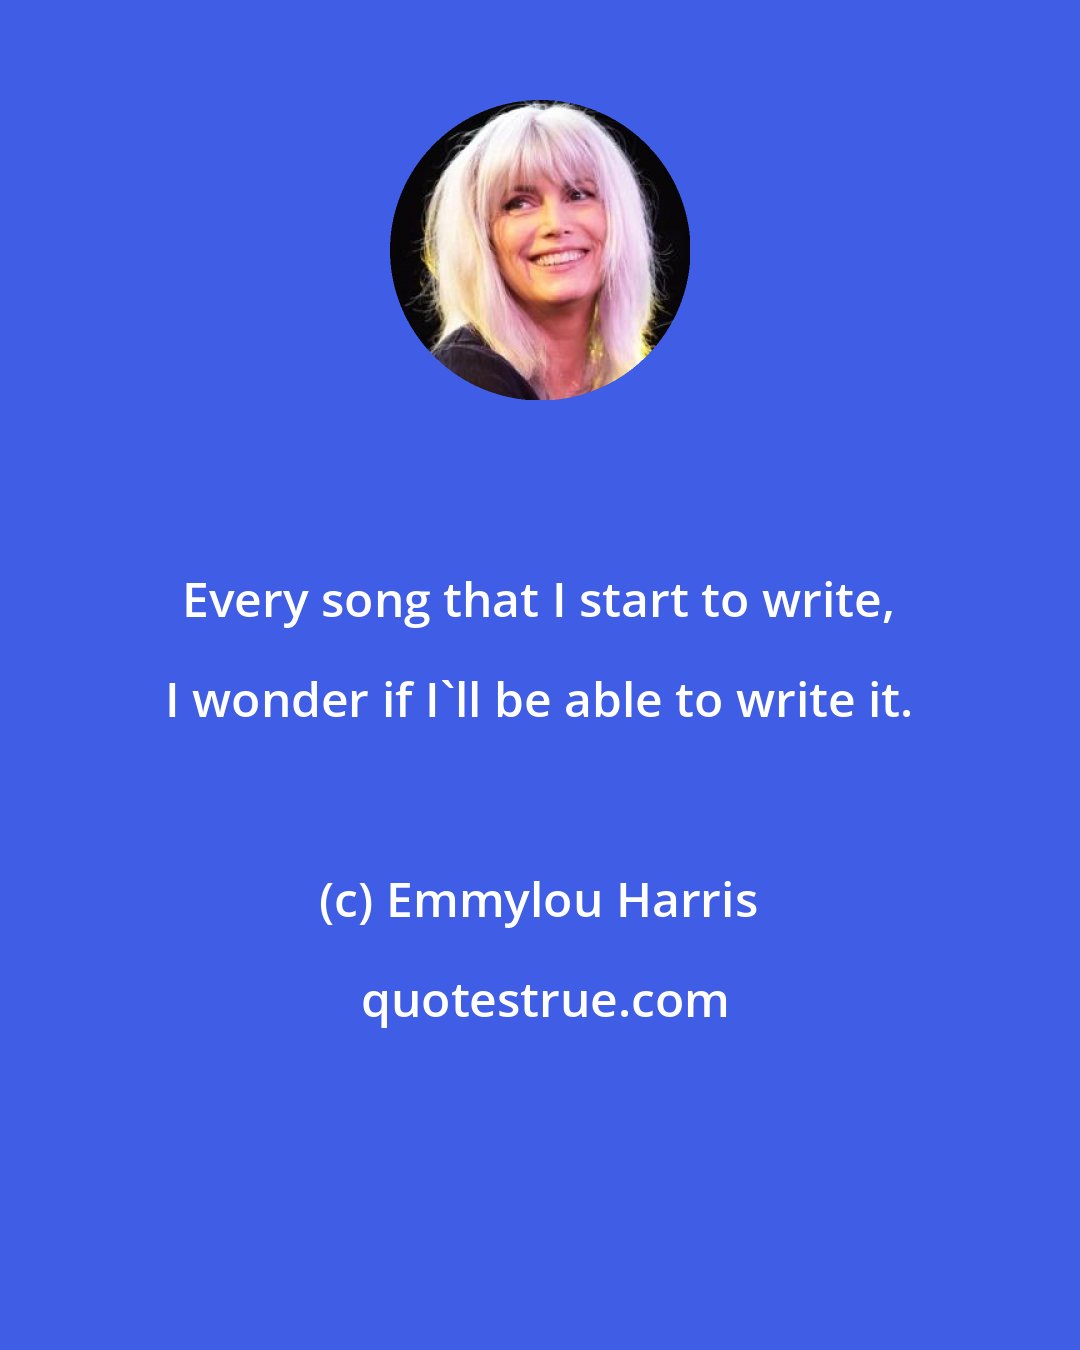 Emmylou Harris: Every song that I start to write, I wonder if I'll be able to write it.